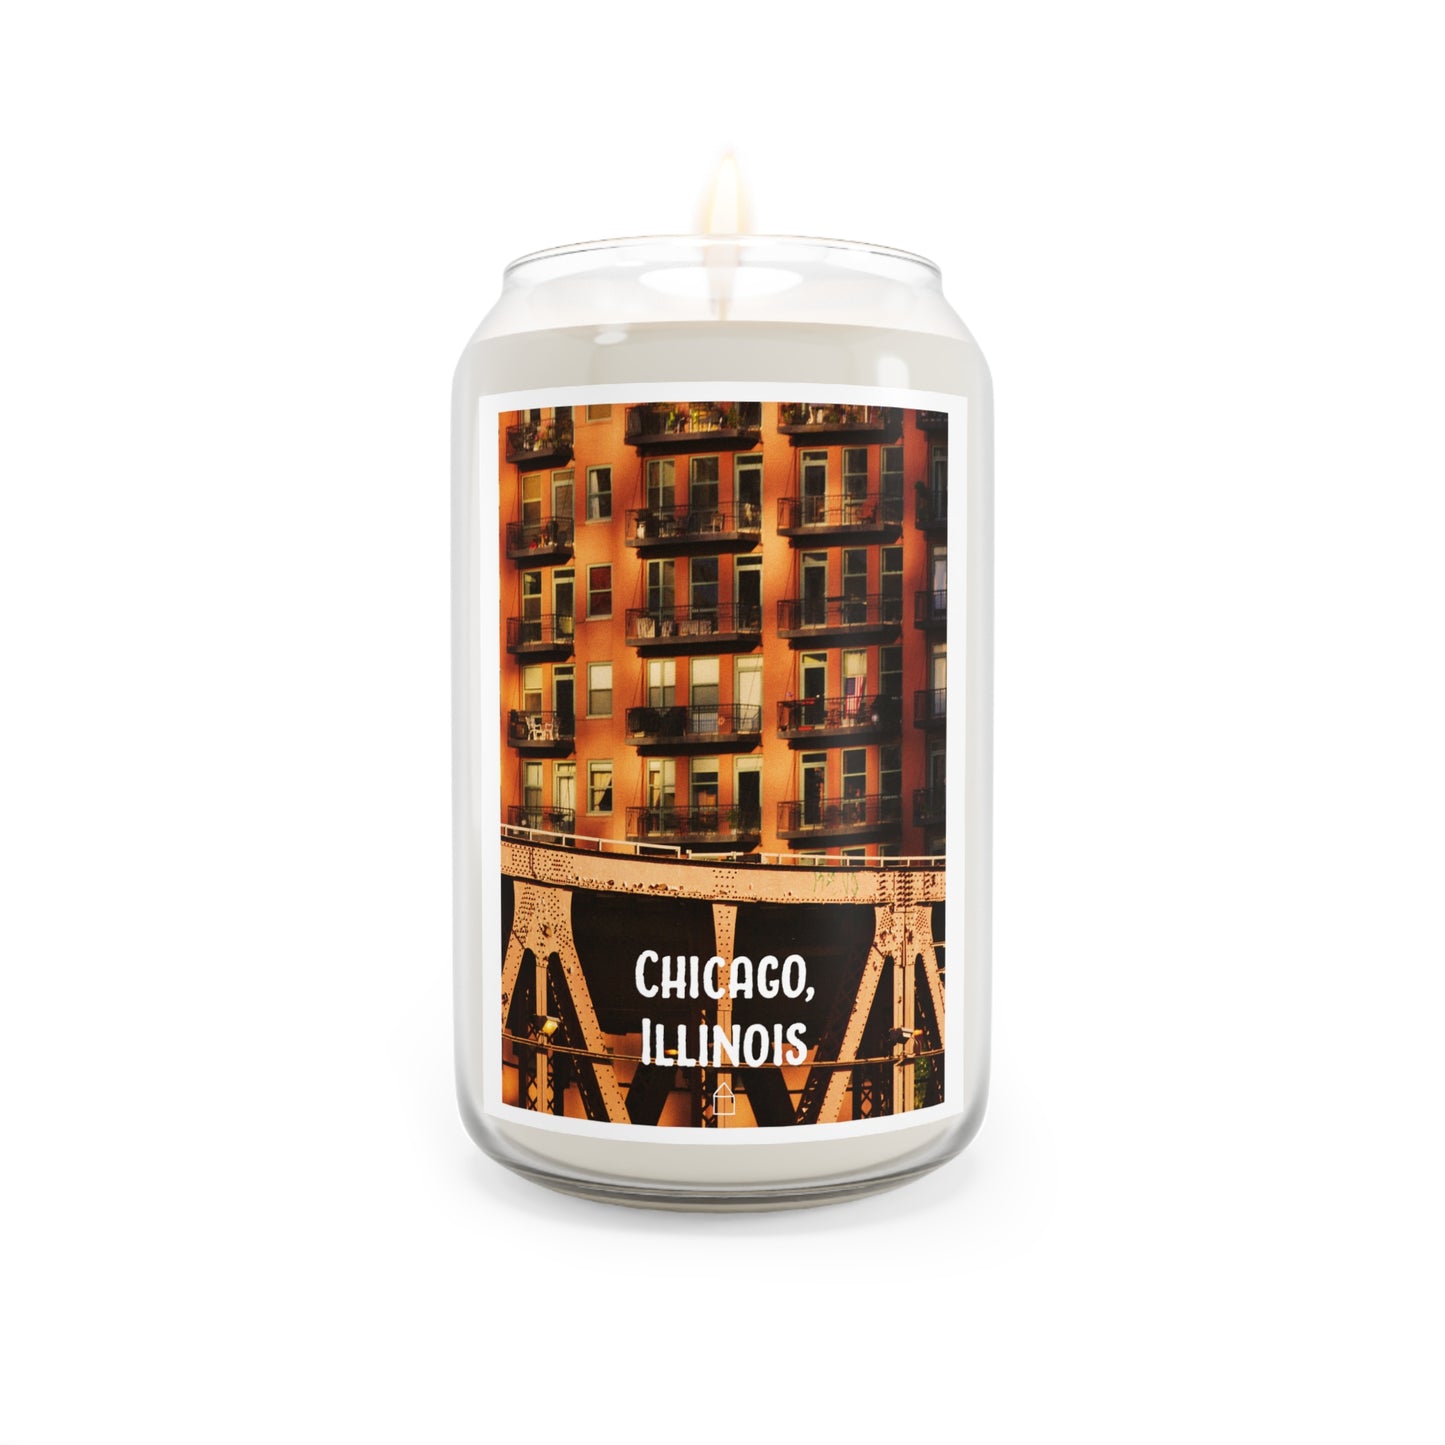 Chicago, Illinois (#029) - Home Town Candles, 13.75oz